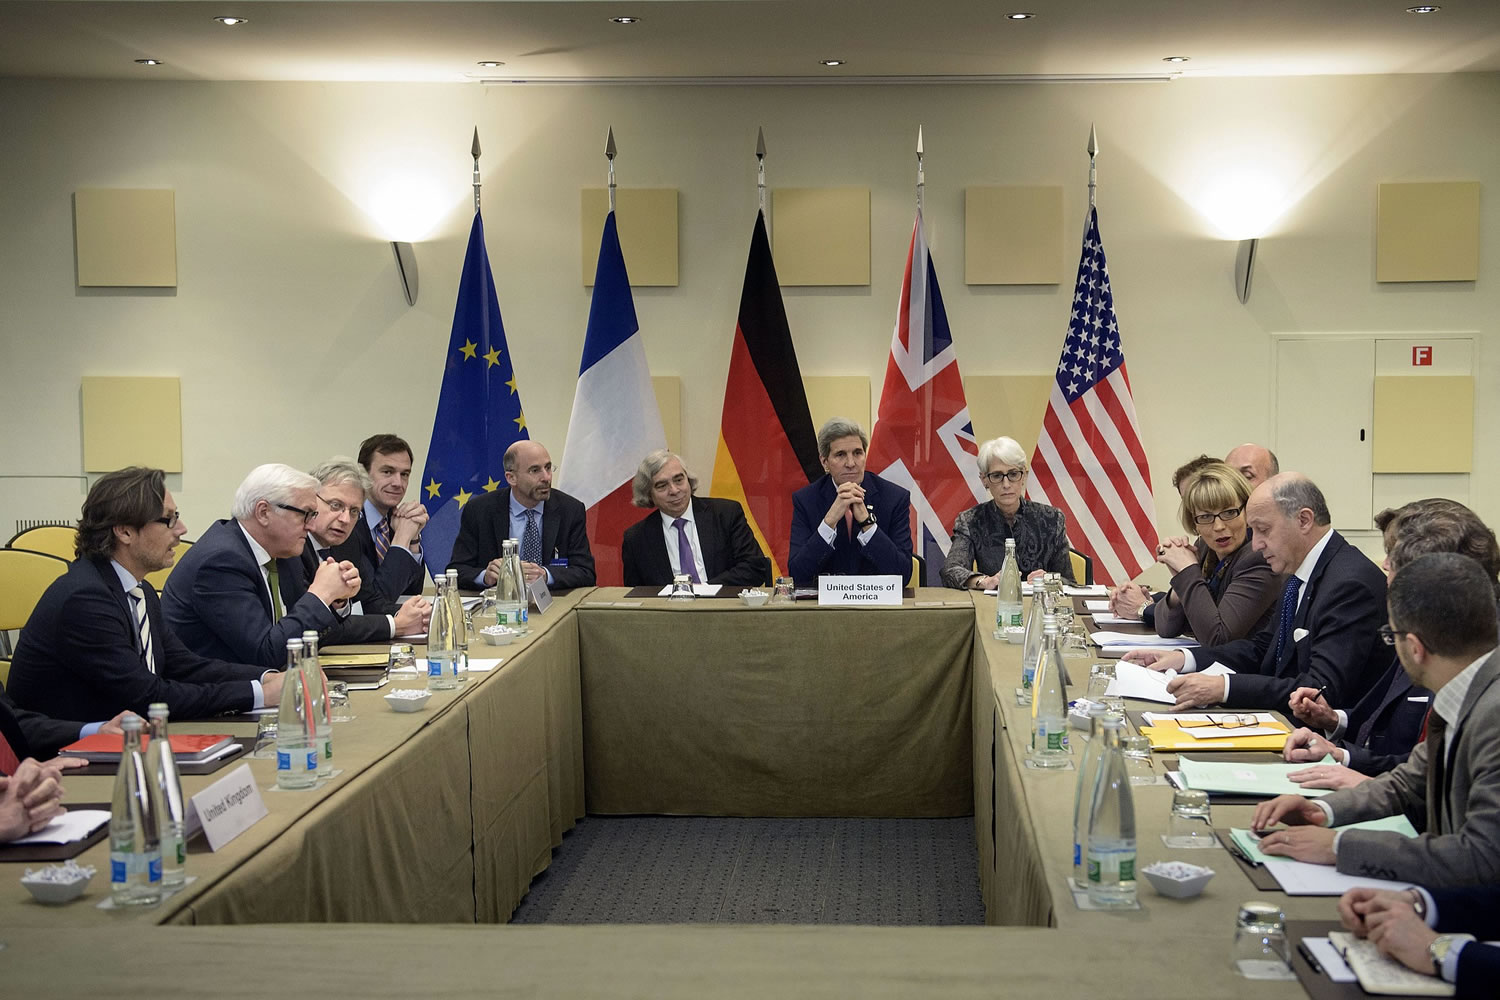 German Foreign Minister, Frank-Walter Steinmeier, 2nd left, US Secretary of Energy, Ernest Moniz, center left, US Secretary of State, John Kerry, center, US Under Secretary for Political Affairs, Wendy Sherman, center right, French Foreign Minister, Laurent Fabius, right, and others wait for the start of a trilateral meeting at an hotel in Lausanne on Saturday. Negotiations over Iran's nuclear program picked up pace on Saturday with the French and German foreign ministers joining U.S.